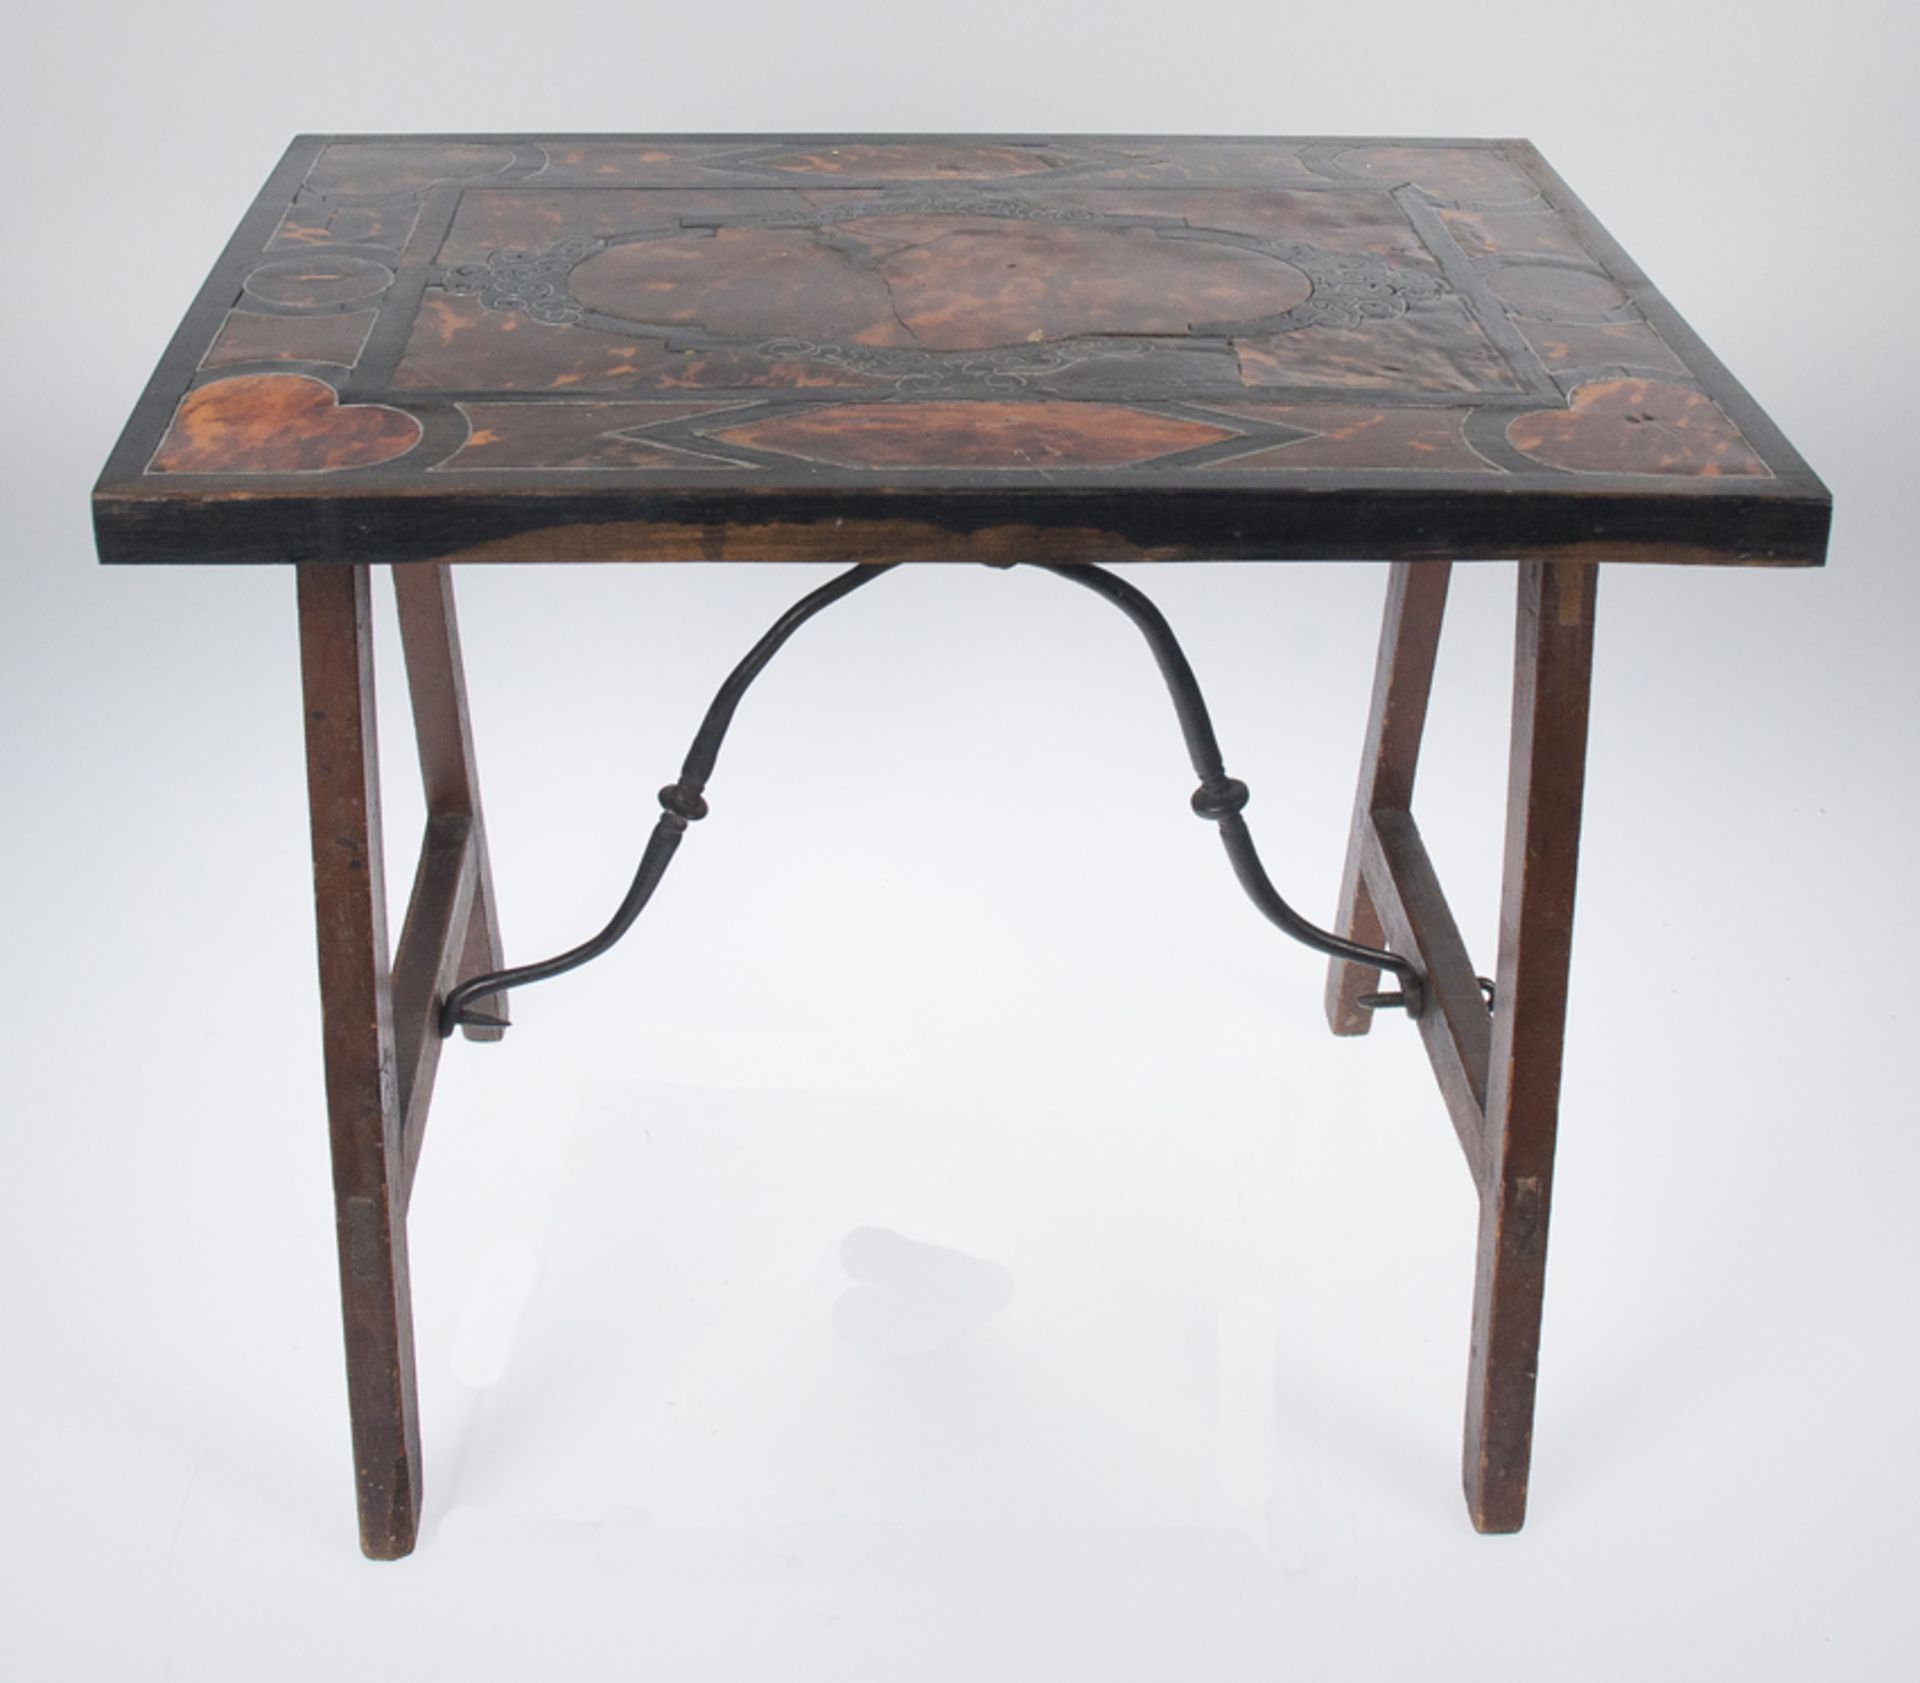 Wood and tortoiseshell table with iron fittings. Colonial work. Mexico. 18th century. - Image 3 of 5